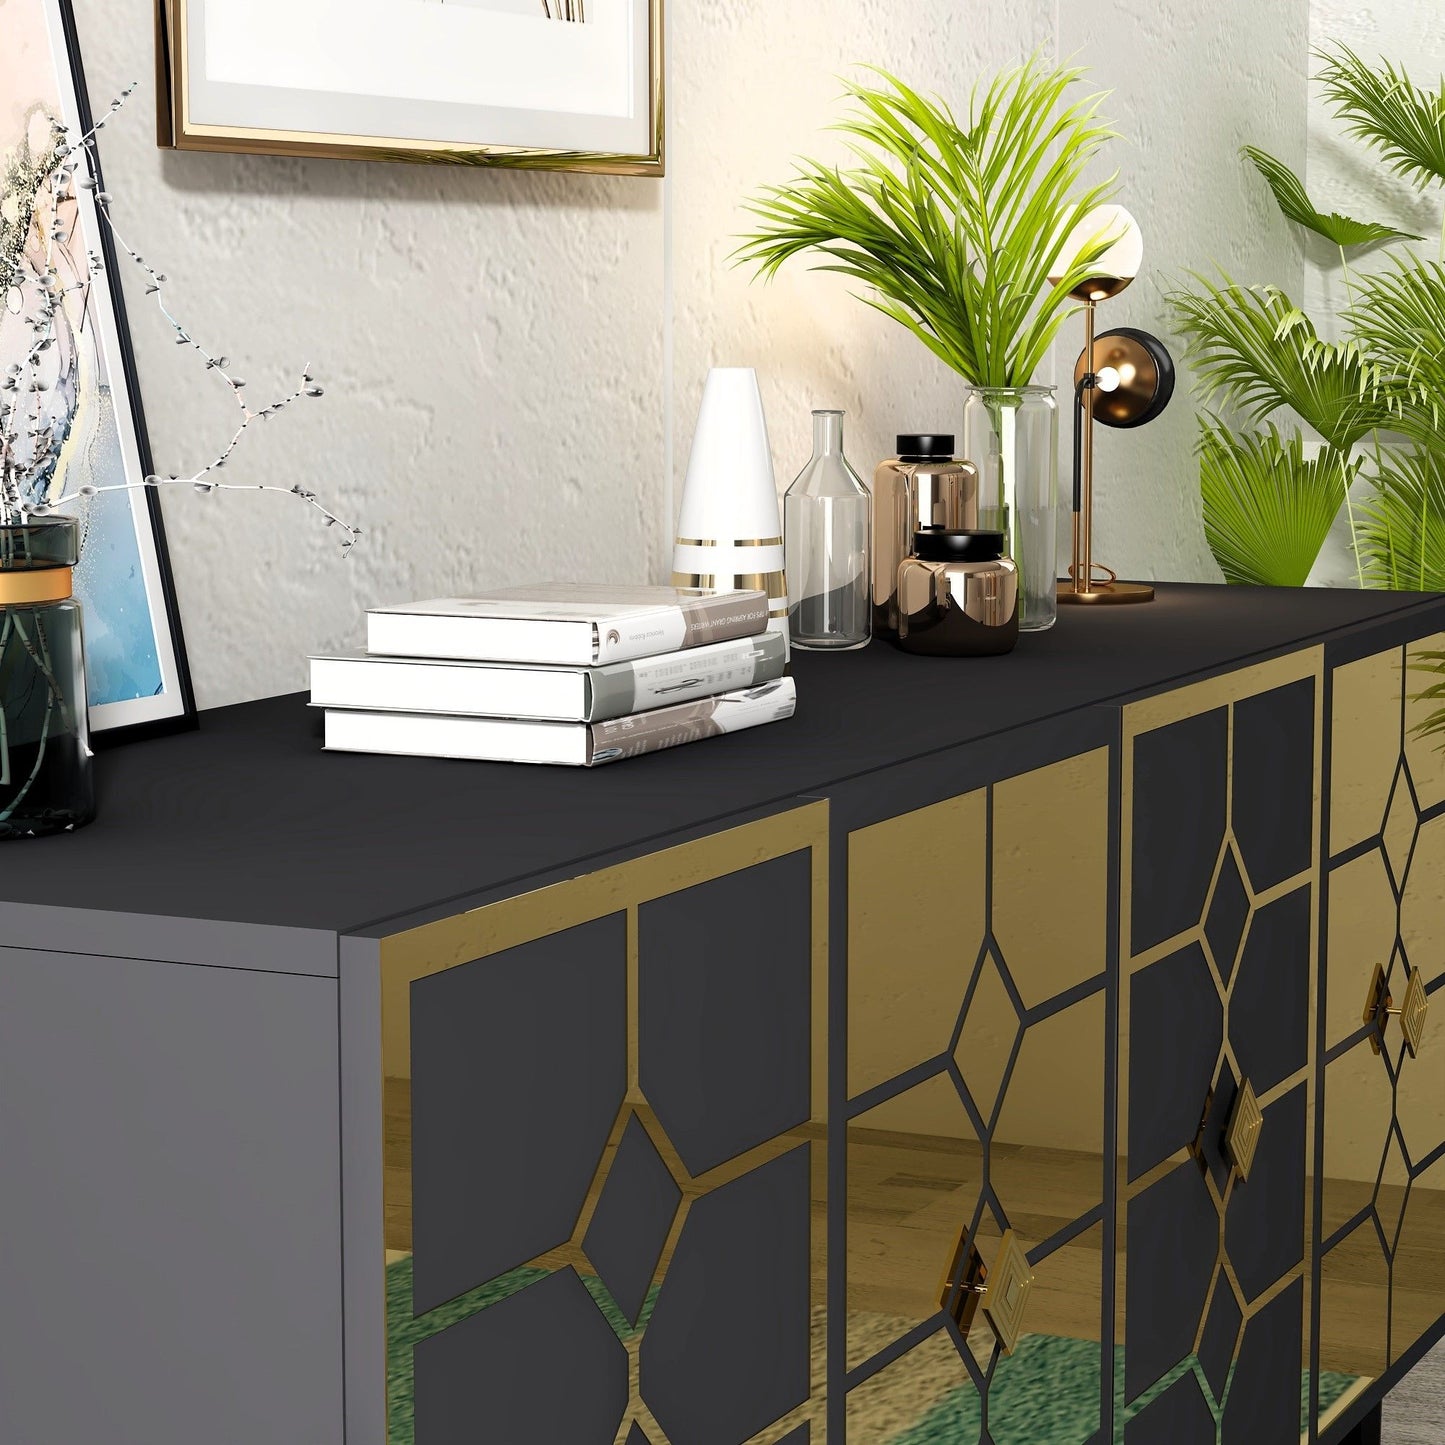 Irmak - Anthracite, Gold - Console